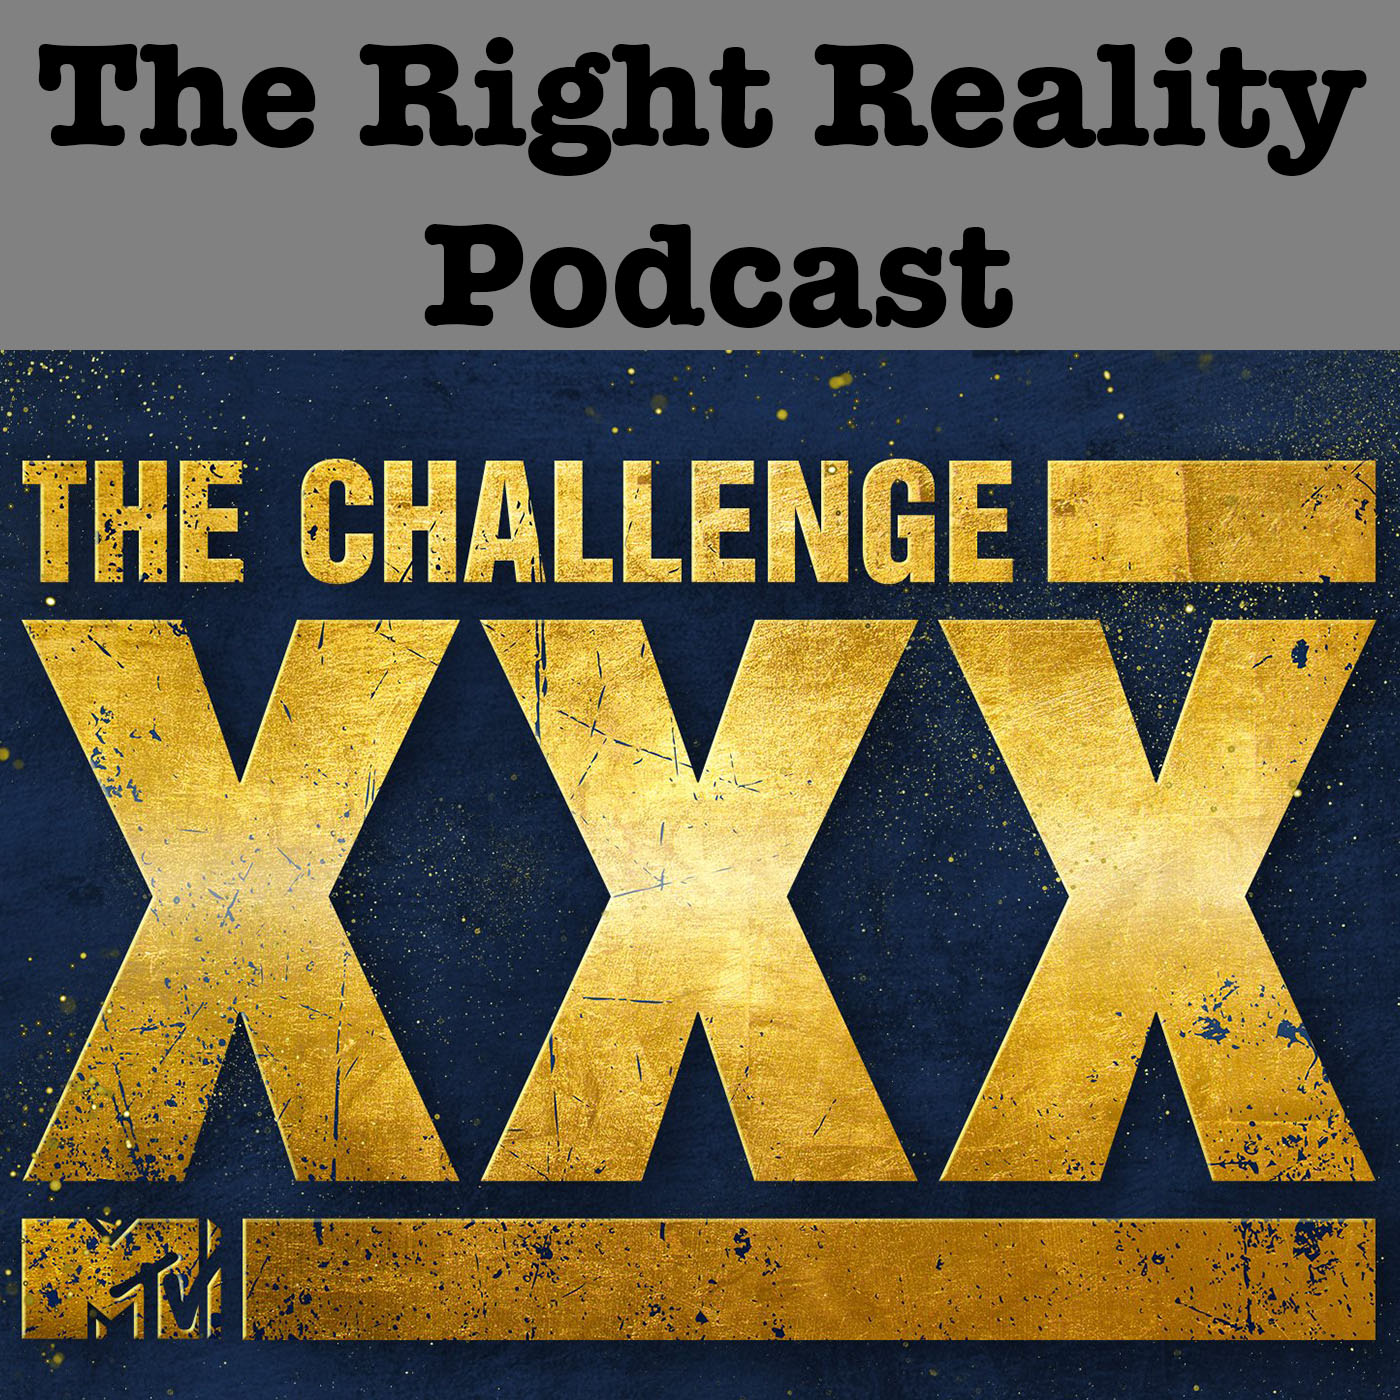 A Million More Reasons | The Challenge Dirty XXX | The Right Reality Podcast